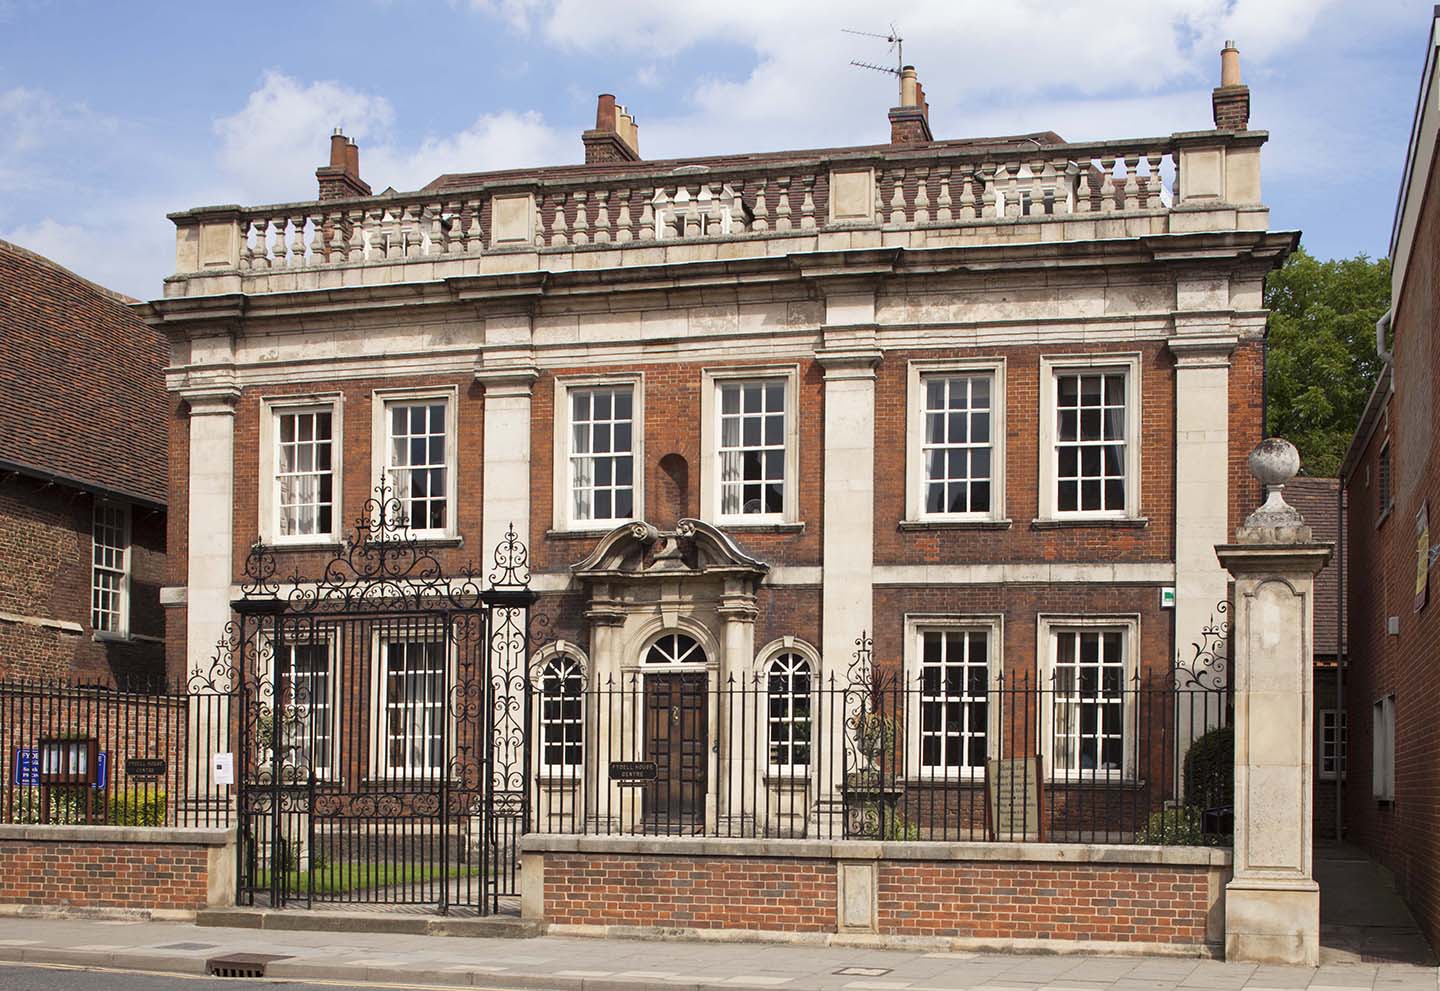 Fydell House, South Square, a fine early 18th century house